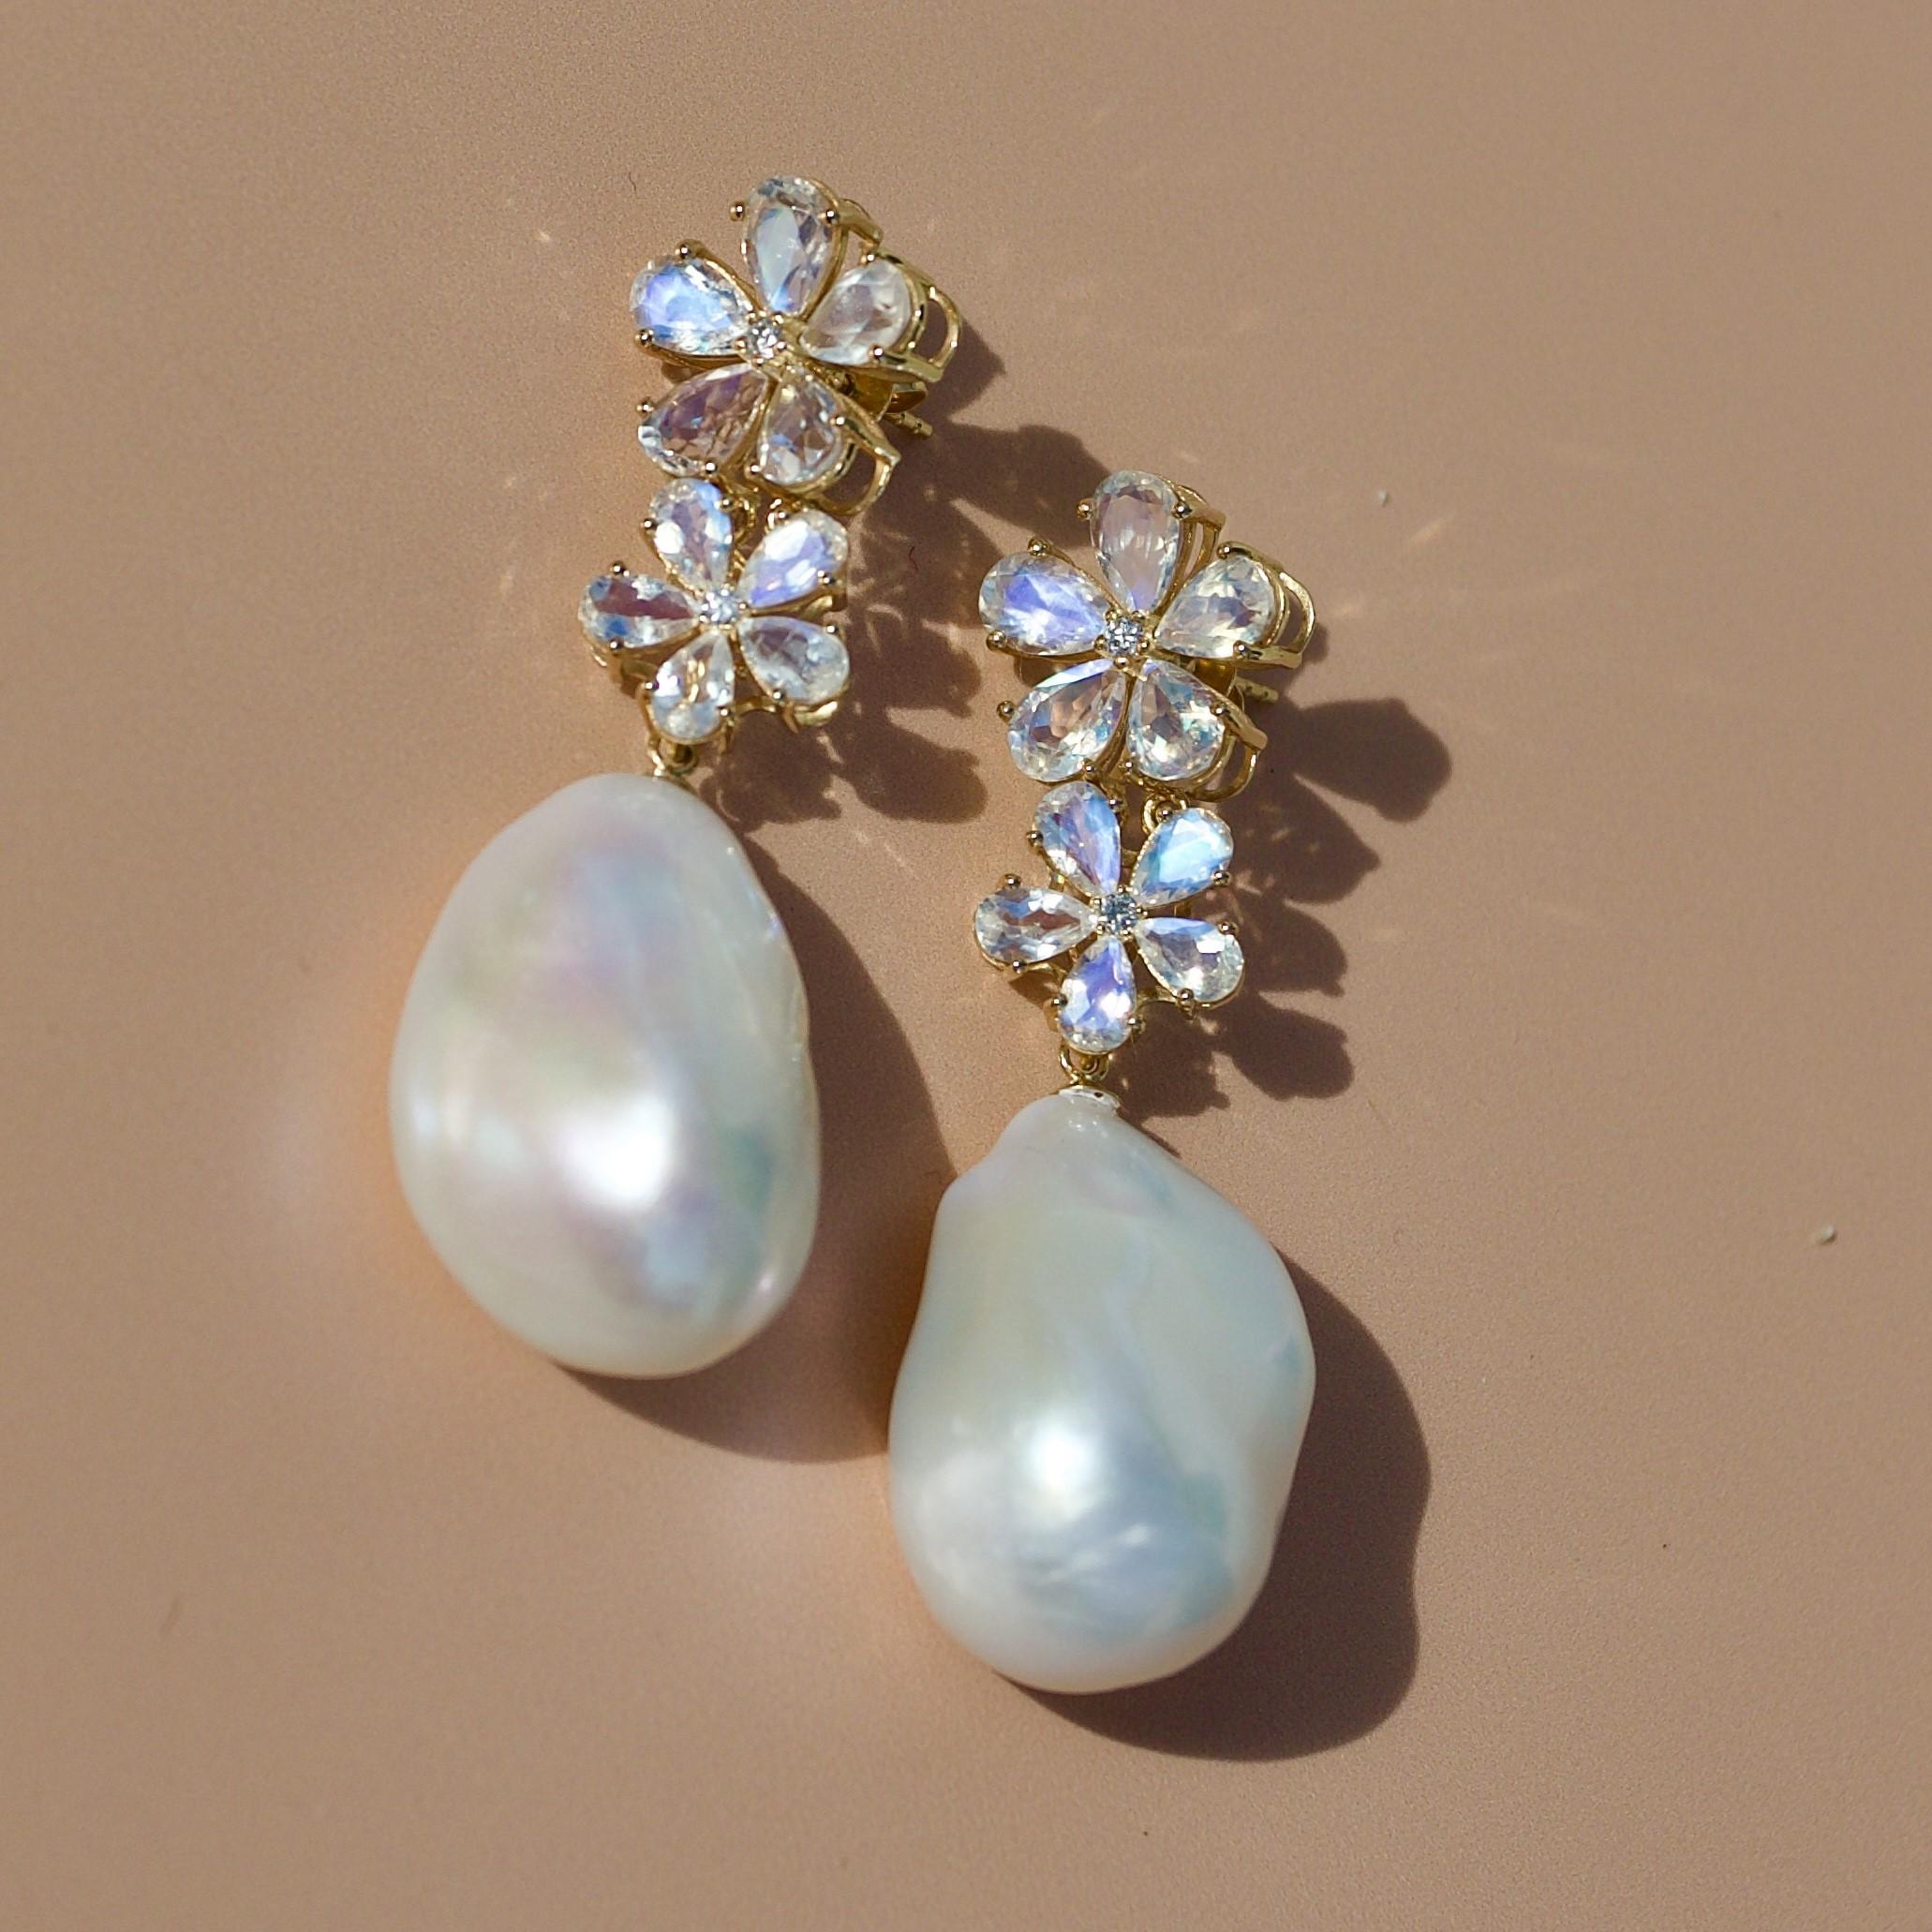 Discover Nina Zhou Moonstone Diamond Blossom and Baroque Pearl Convertible Drop Earrings in 18k Yellow Gold. These earrings blend the serene glow of moonstones with the timeless sparkle of diamonds, all cradled in a delicate, nature-inspired blossom